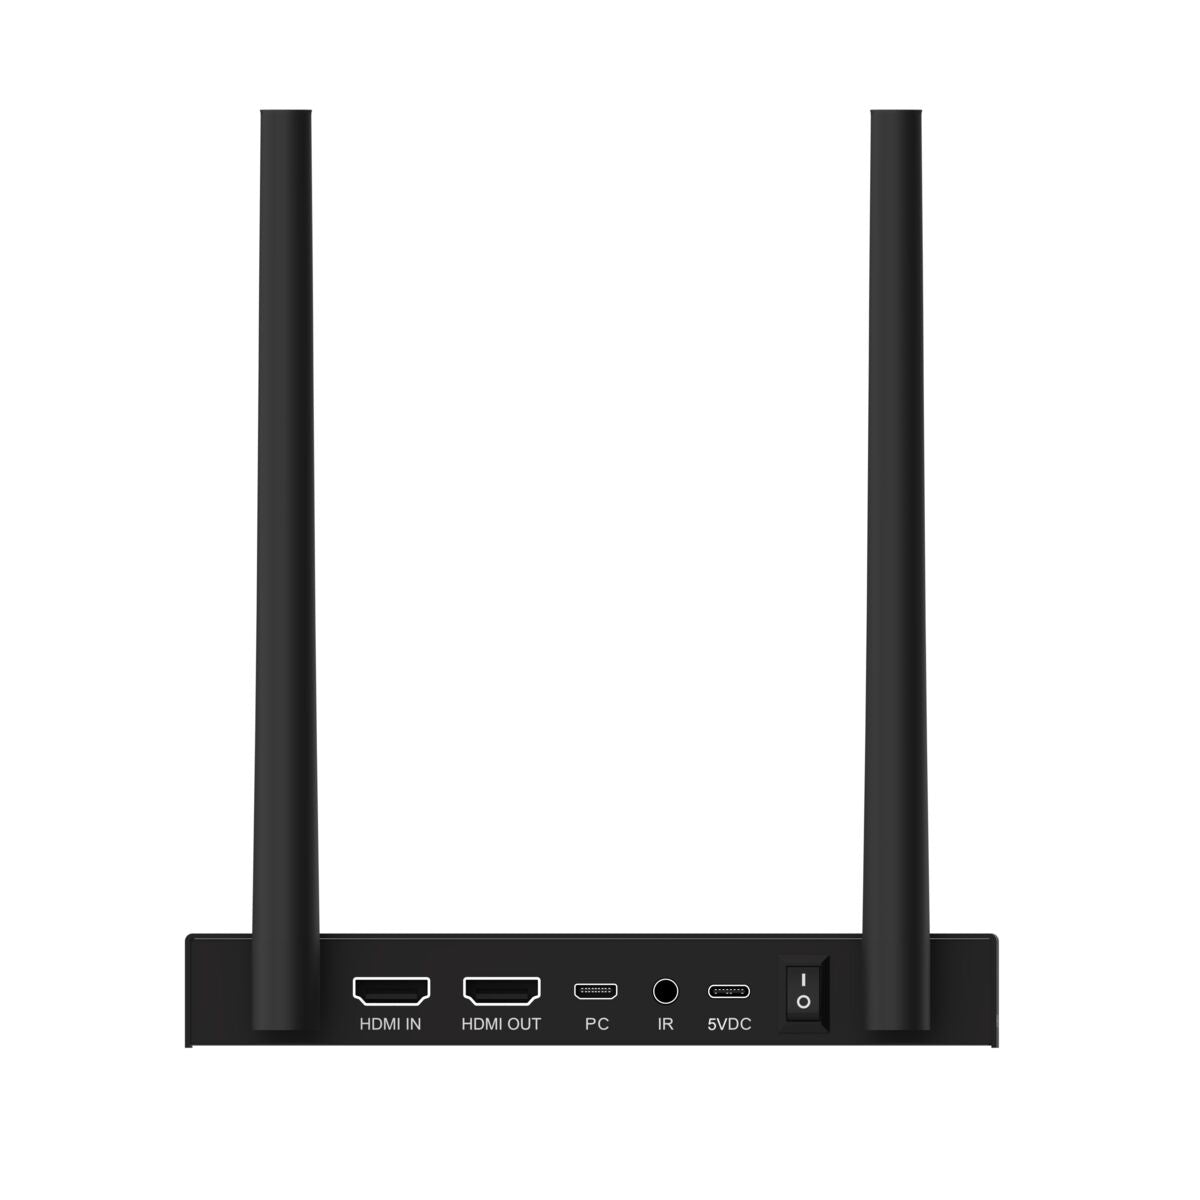 TVAW4K Pro - Wireless 4K HDMI extender - Possible to connect multiple displays